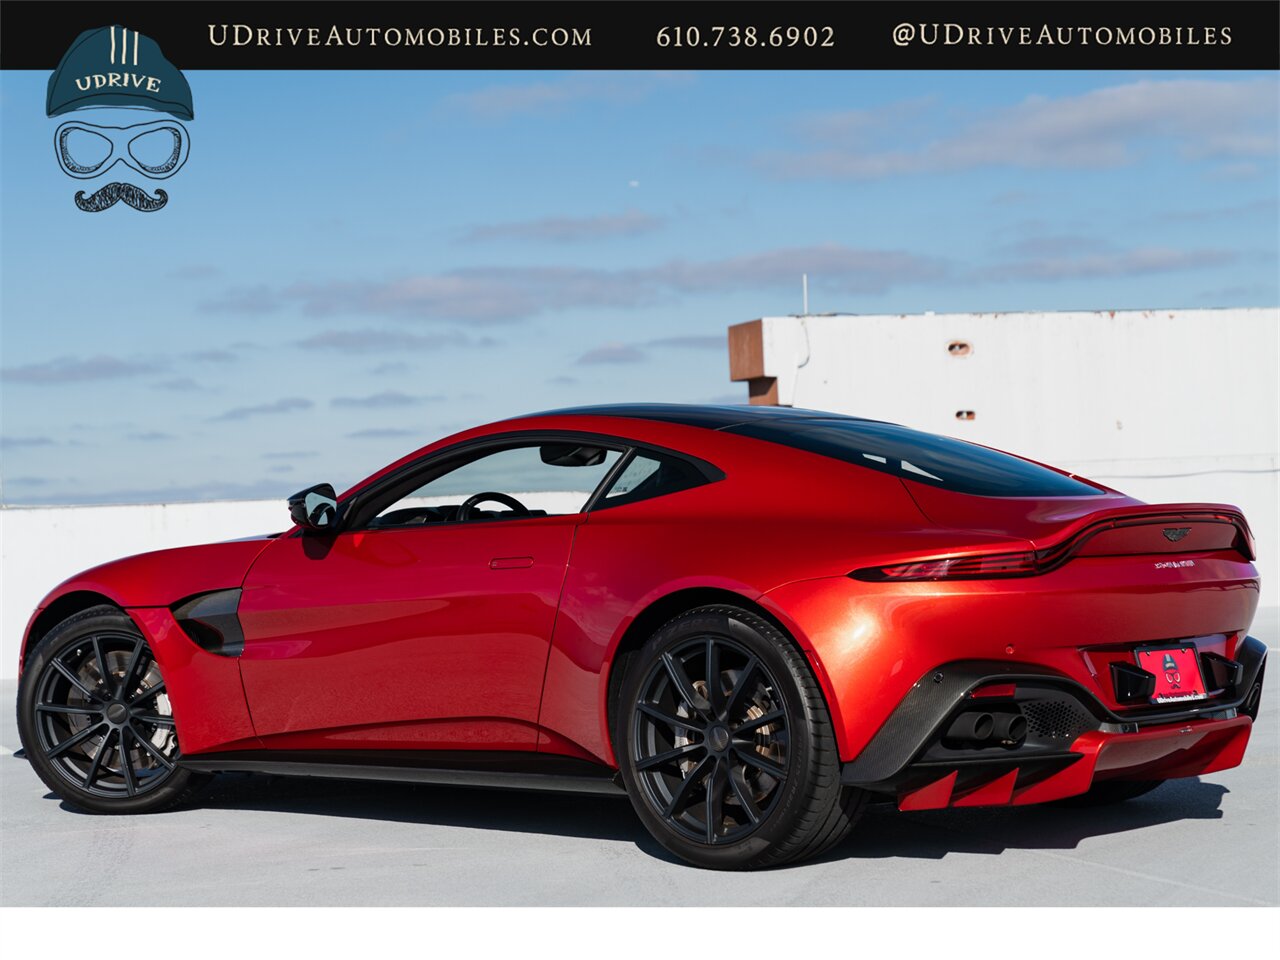 2019 Aston Martin Vantage  Incredibly Spec Rare Q Exclusive Fiamma Red $222k MSRP 1 of a Kind CPO - Photo 4 - West Chester, PA 19382